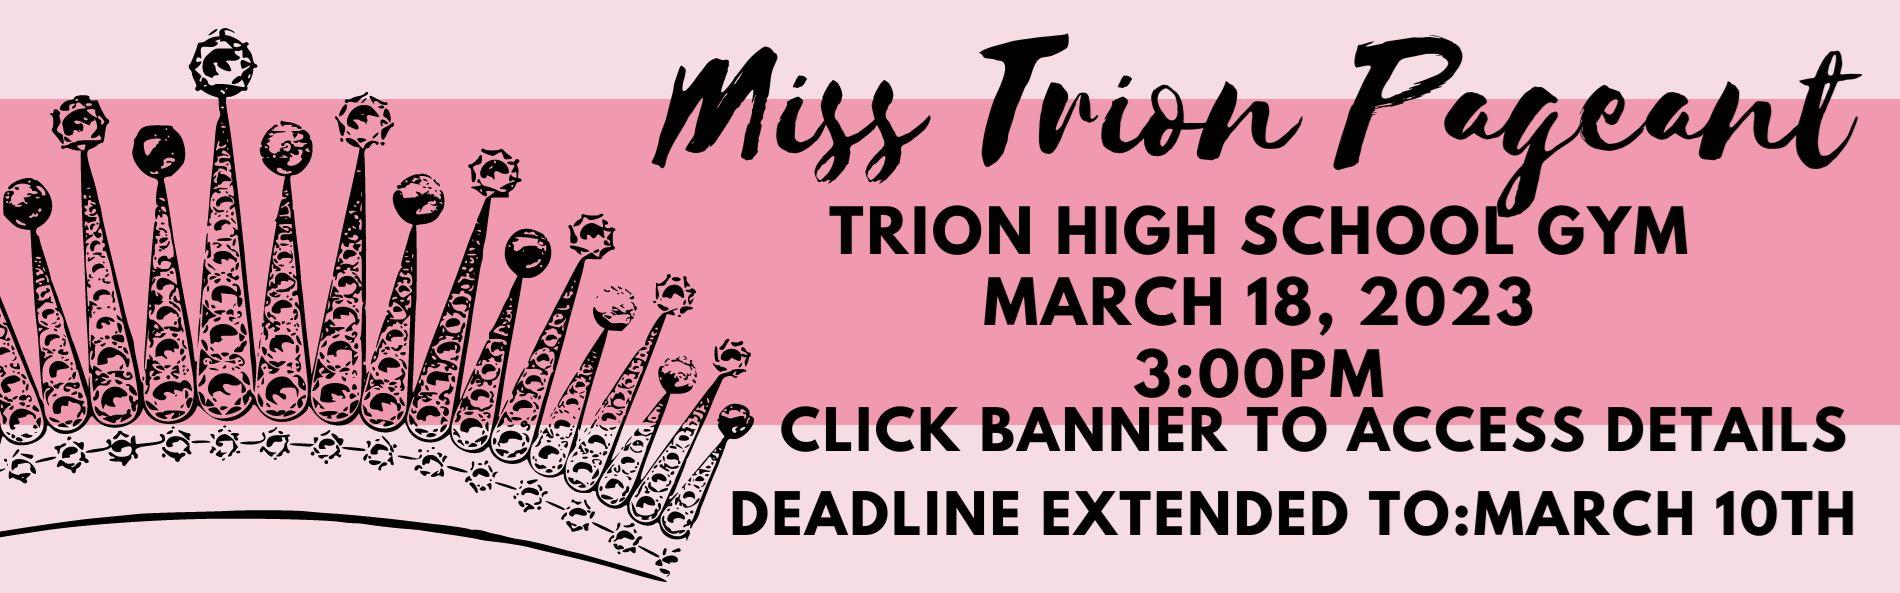 MISS TRION PAGEANT